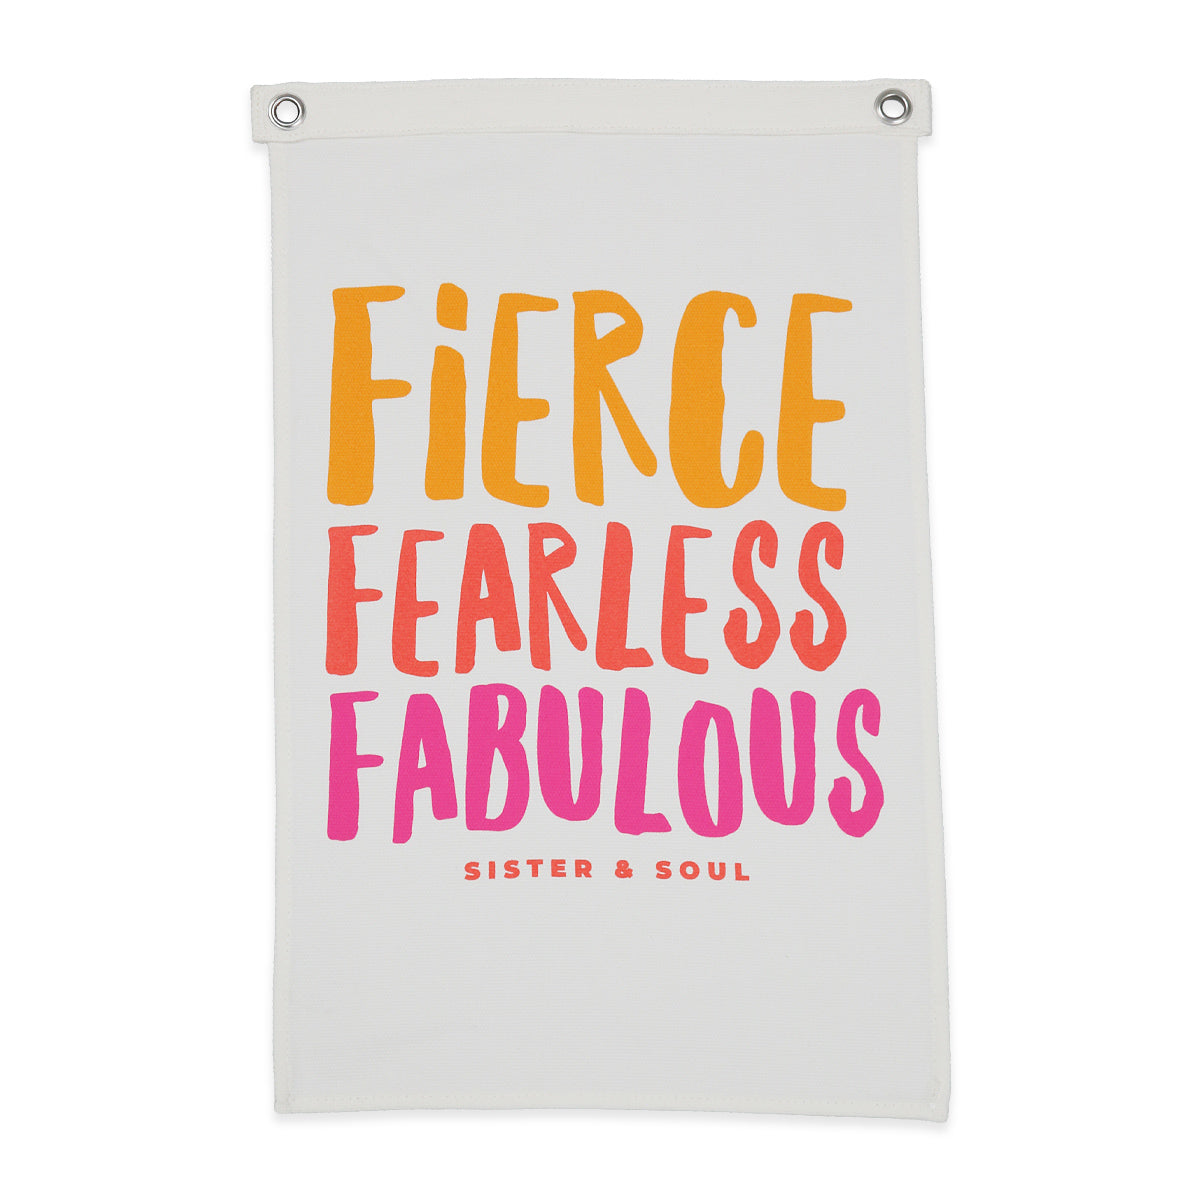 FIERCE FEARLESS FABULOUS - Canvas Flag - Cream With Eyelets